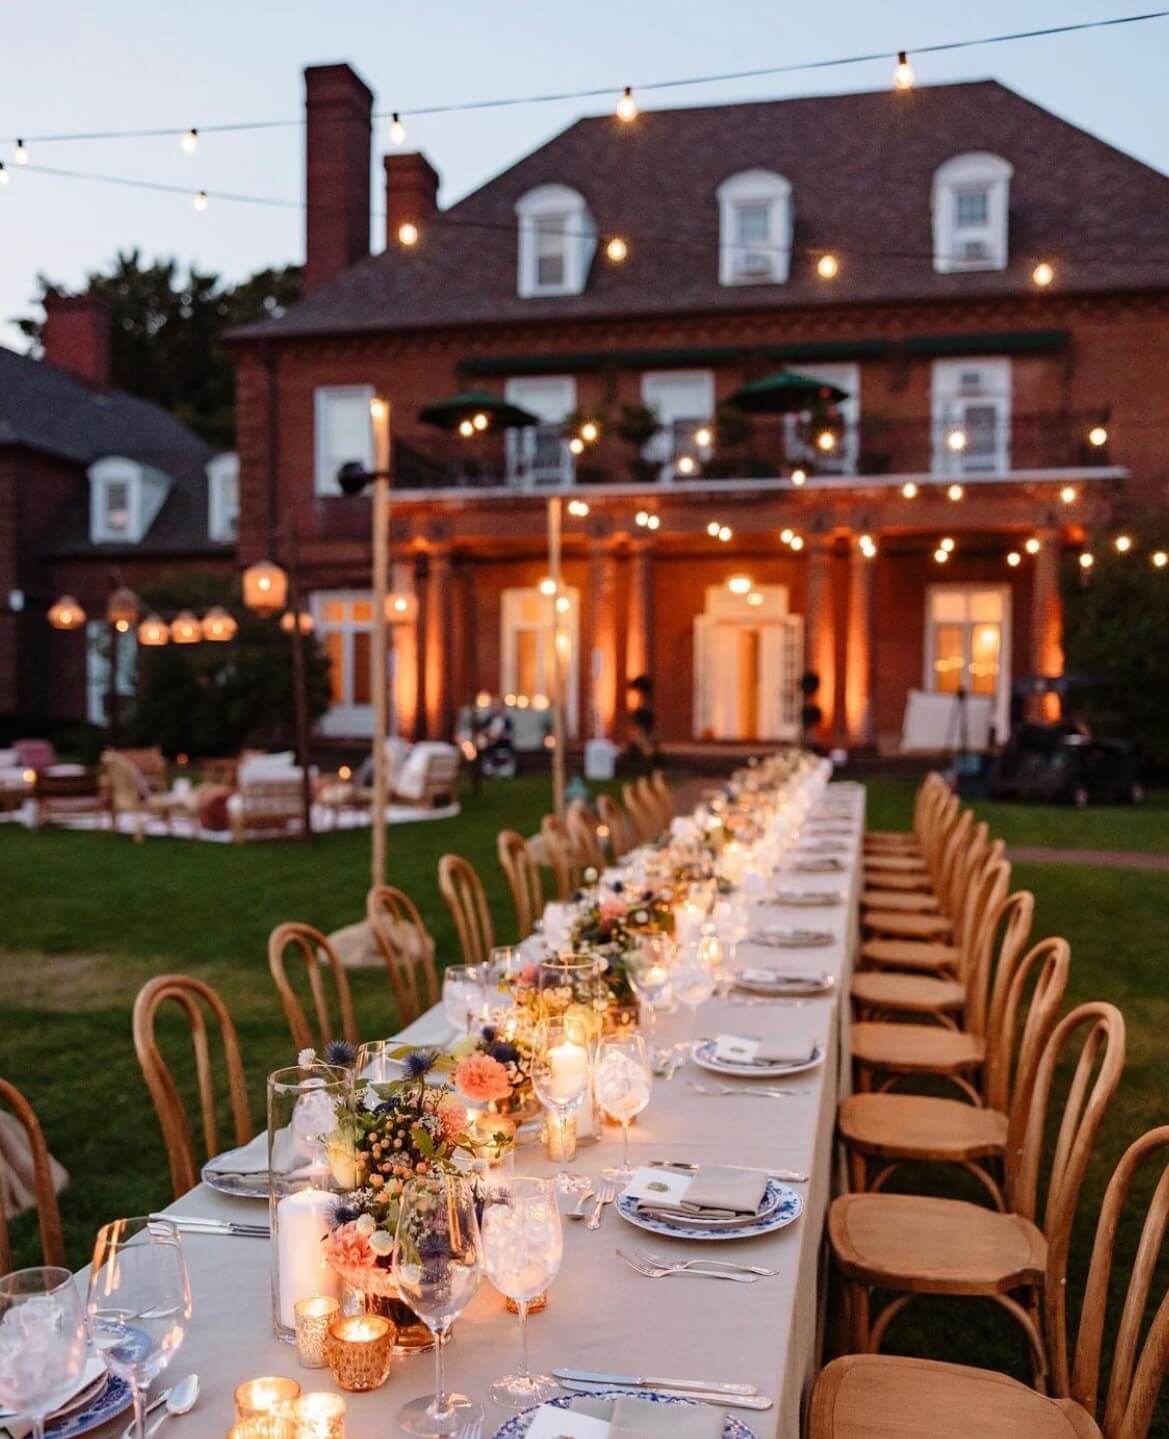 “There’s a lot of heart and soul here.” Pine Hollow Club Offers Beauty, Sophistication, and Versatility on Your Wedding Day